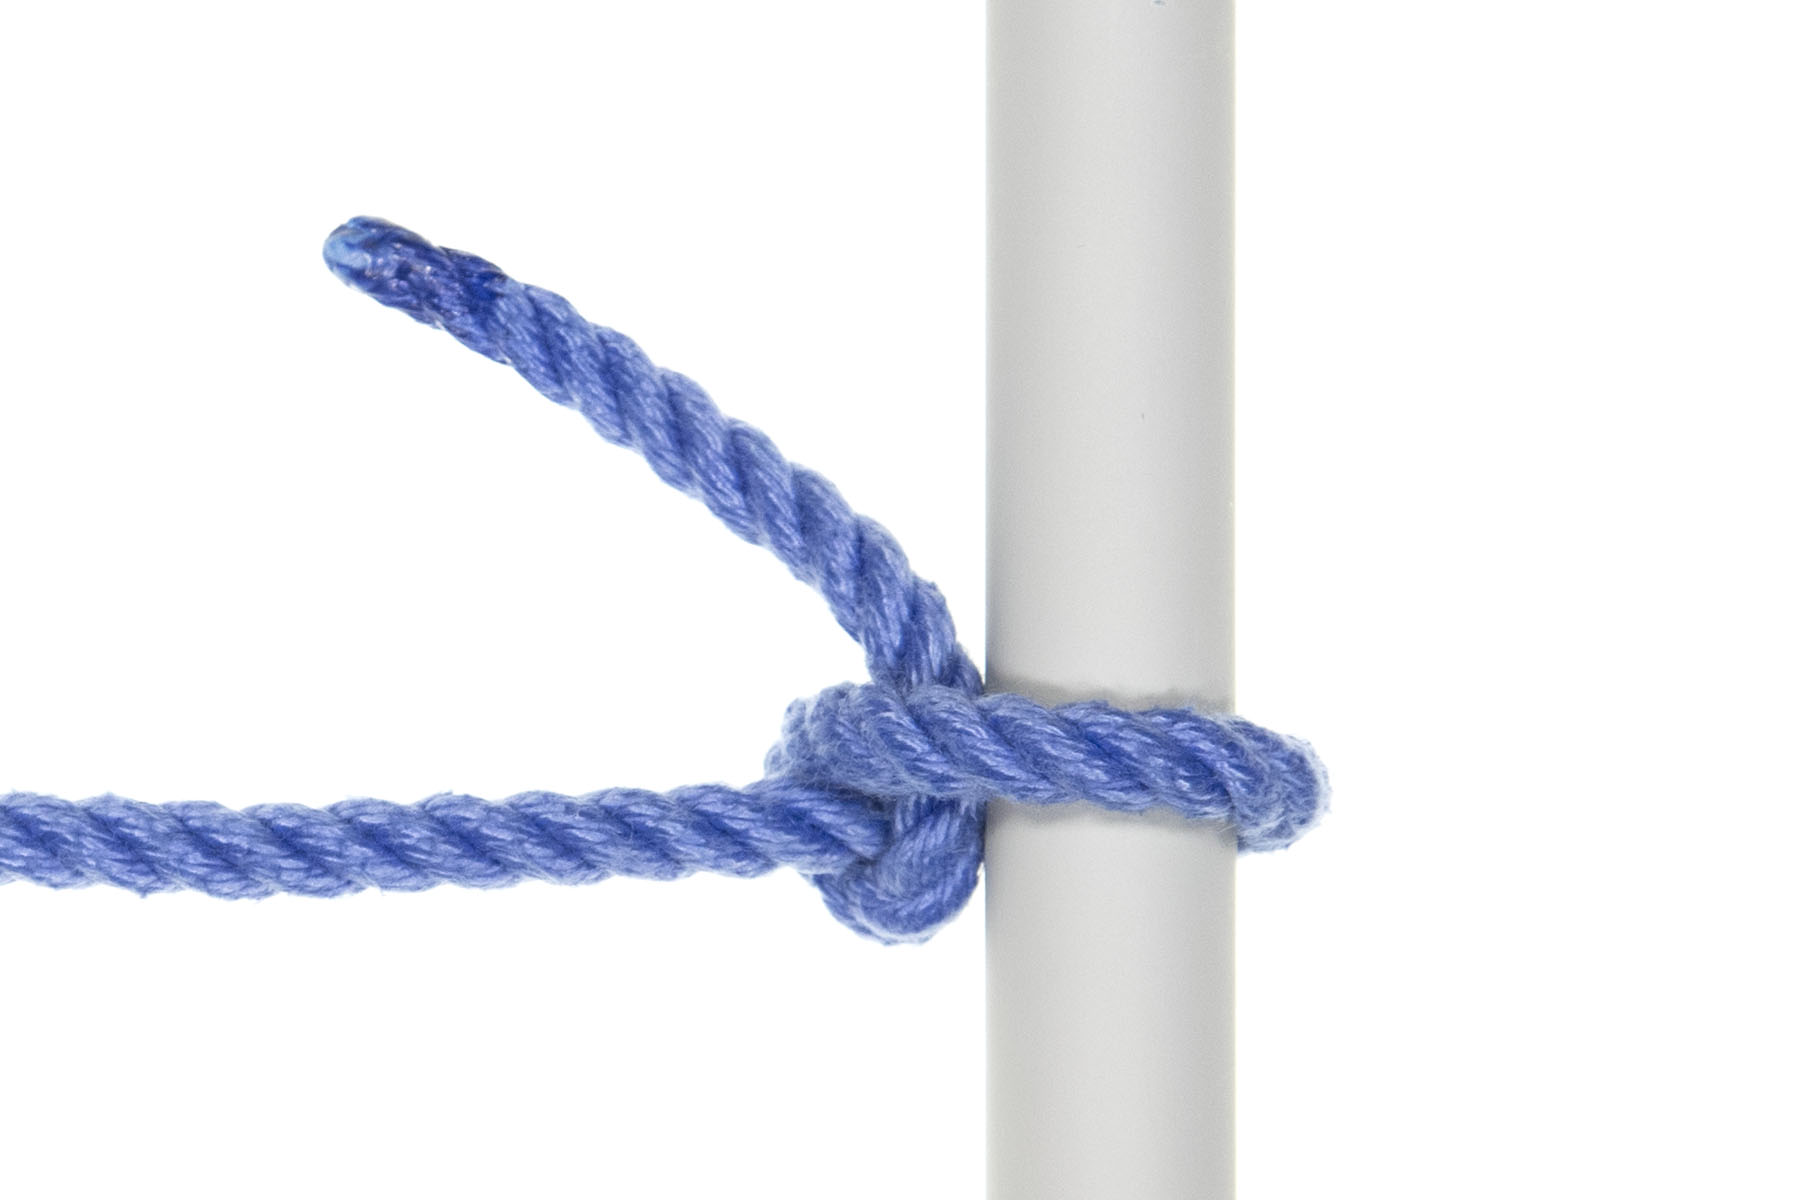 A half hitch tied around a one inch gray pole. The rope goes around the pole, around the standing part, and under itself, making a compact knot right against the pole.